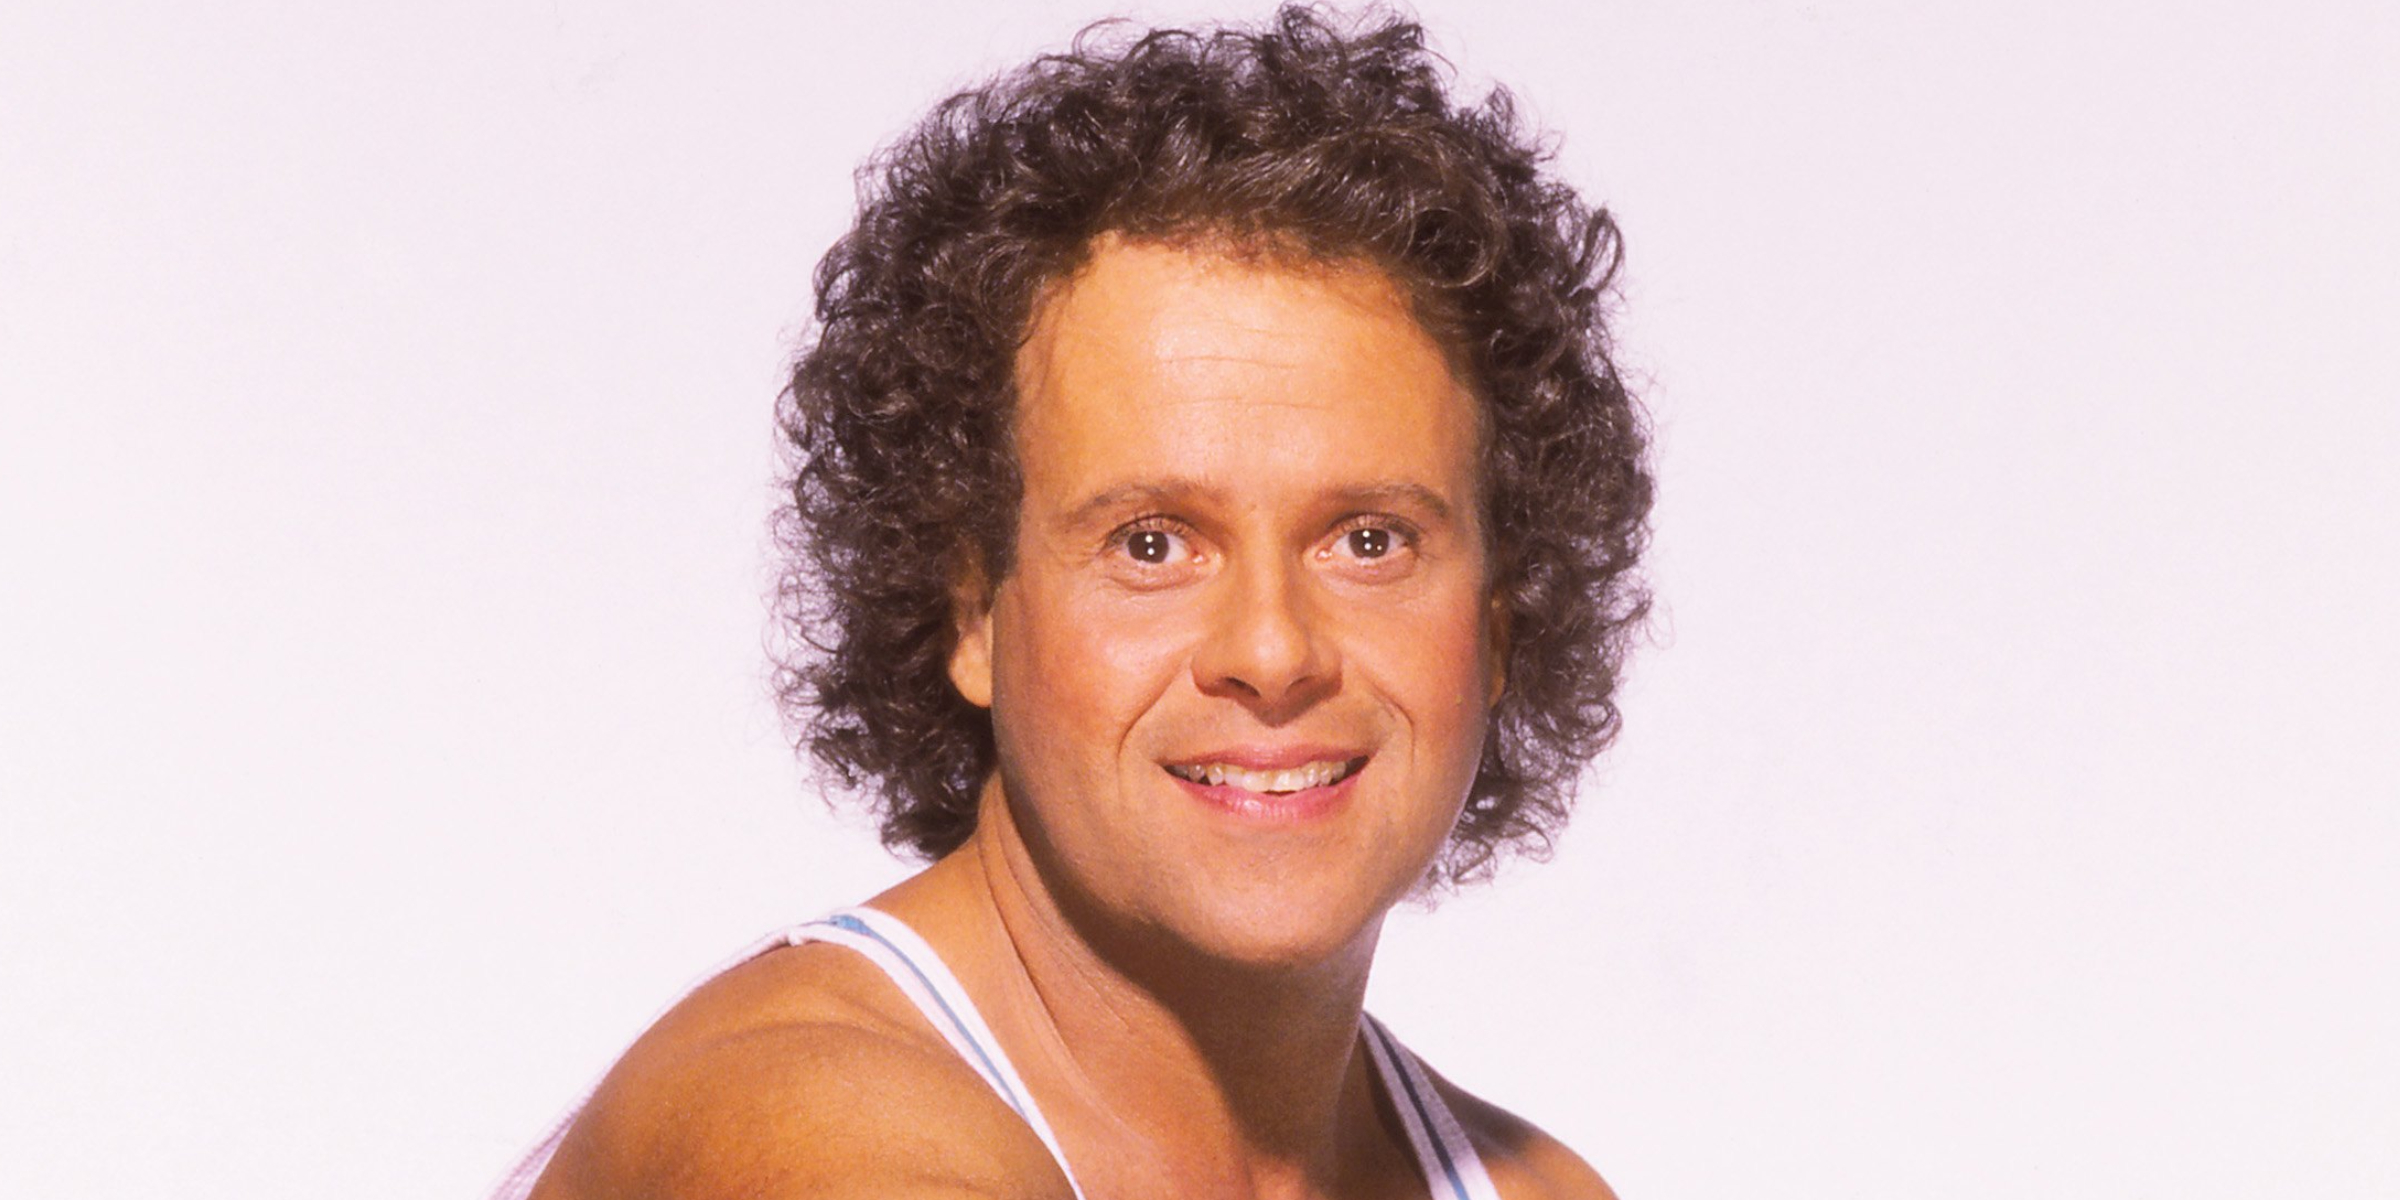 Richard Simmons | Source : Getty Images